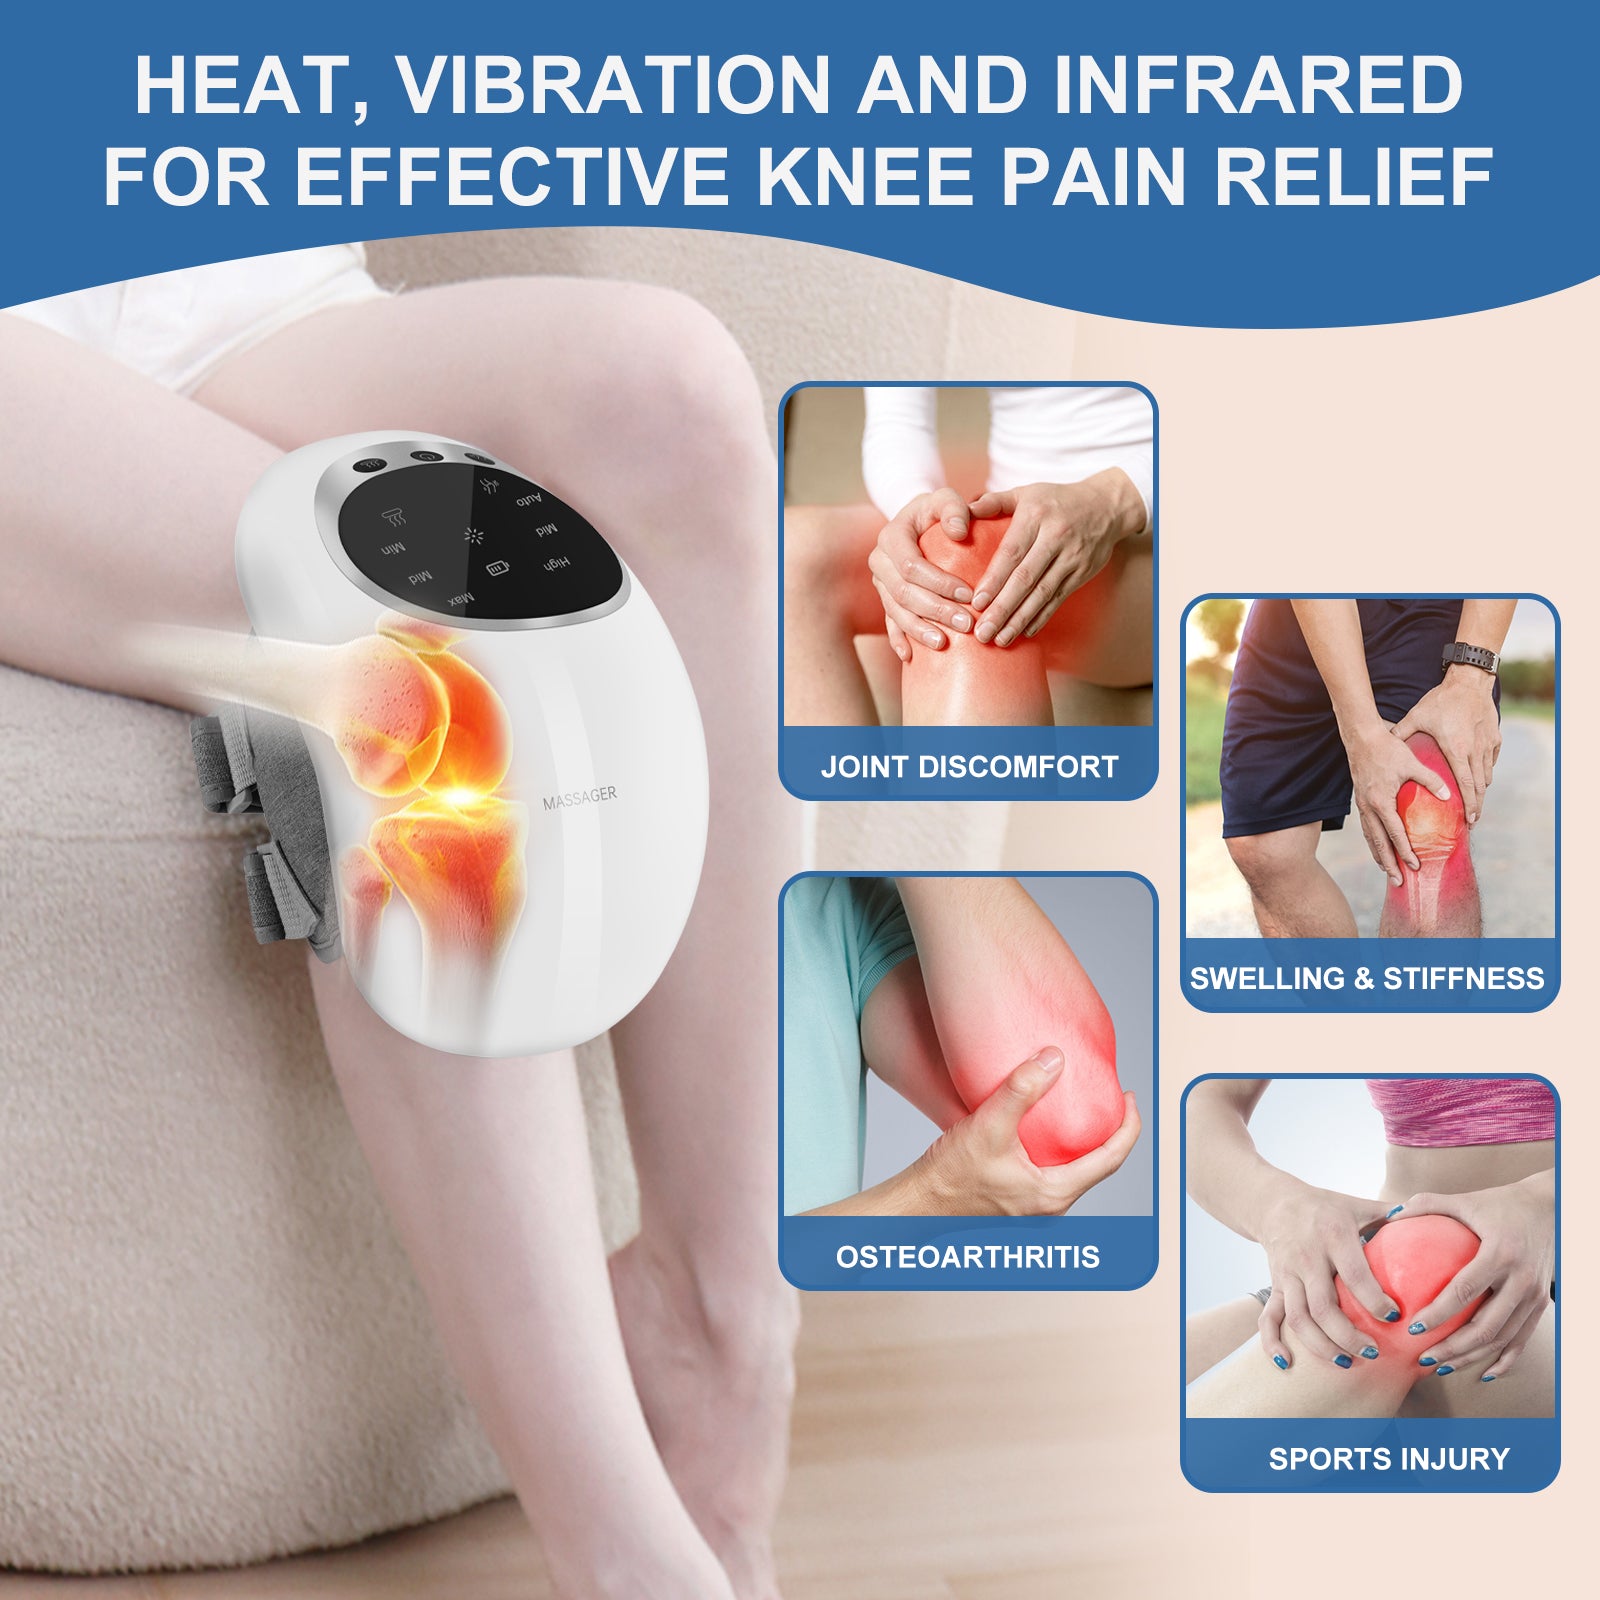 Hotodeal Knee Massager,Cordless Knee Massager with Infrared Heat and Vibration,Adjustable Temperature Knee Massager with Clear Visible LED Screen for Swelling Stiff Pain Joints